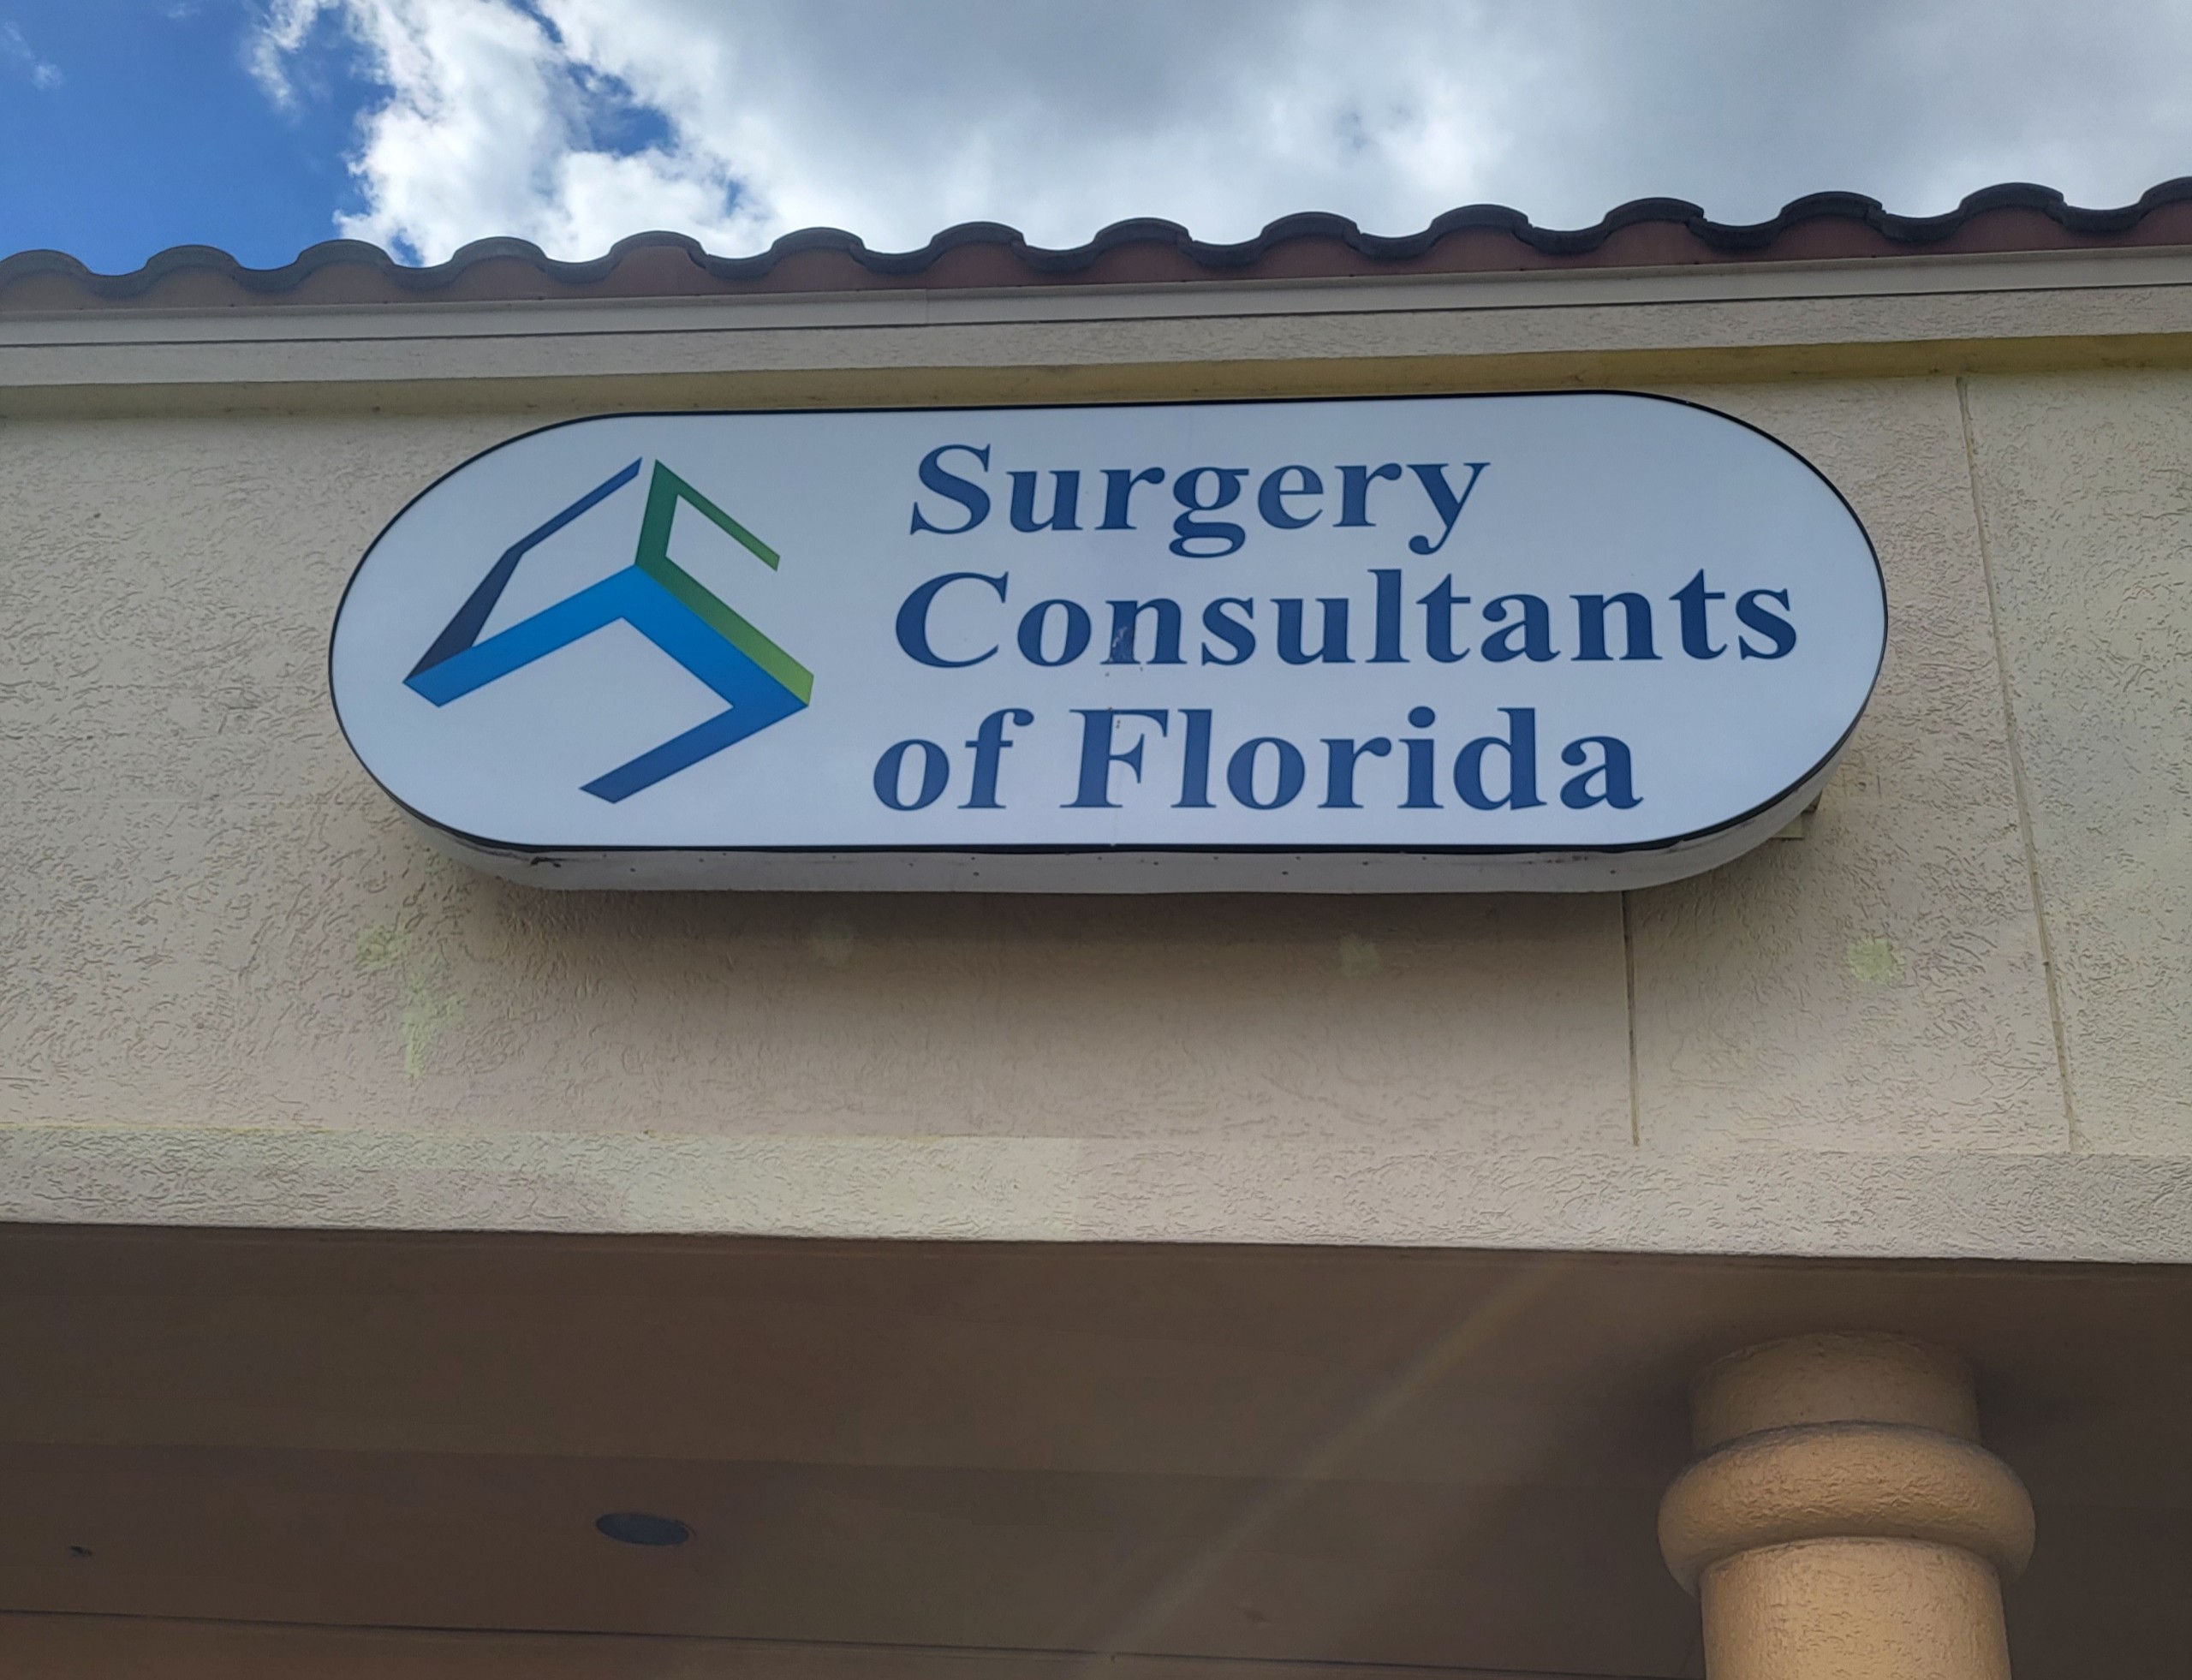 A signboard for "Surgery Consultants of Orlando, Florida" with a distinctive logo mounted on an exterior wall under a clear sky.